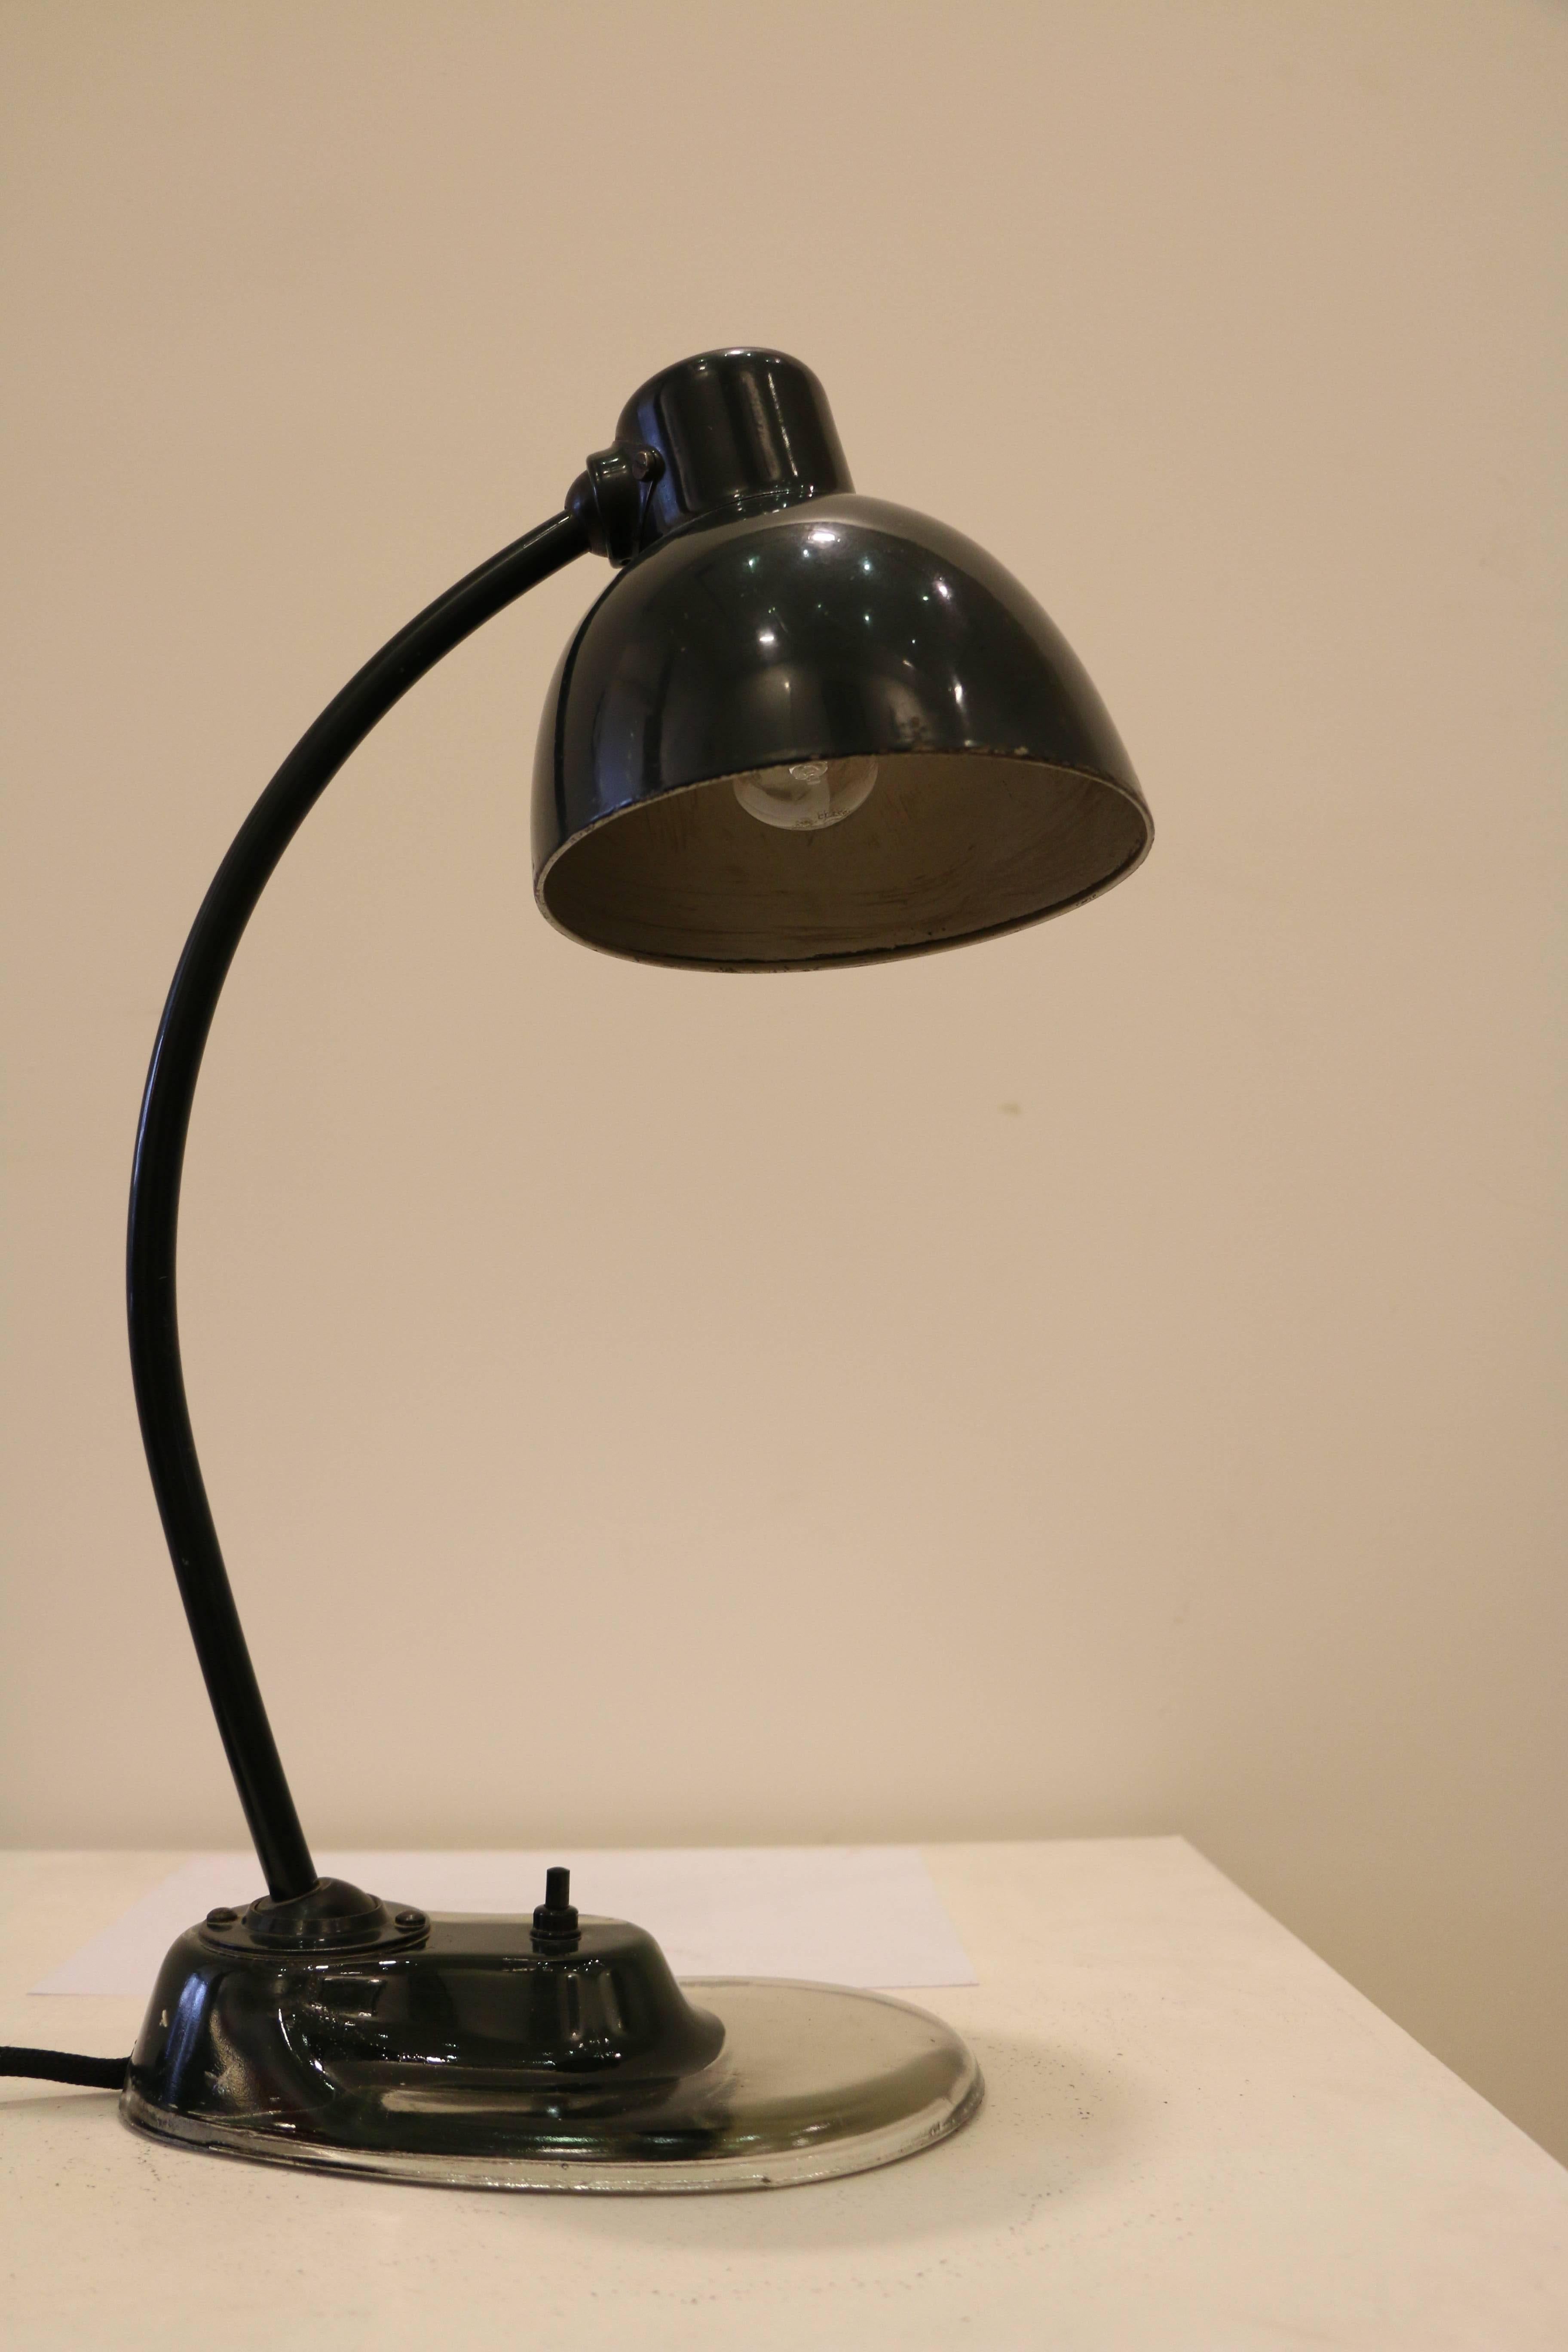 Emblematic Bauhaus desk lamp designed by Marianne Brandt (1893 - 1983) and manufactured by Kandem. It has the typical glass base which makes this model the much sought after one. Original dark green paint. 
Fully functional.
Wired for European